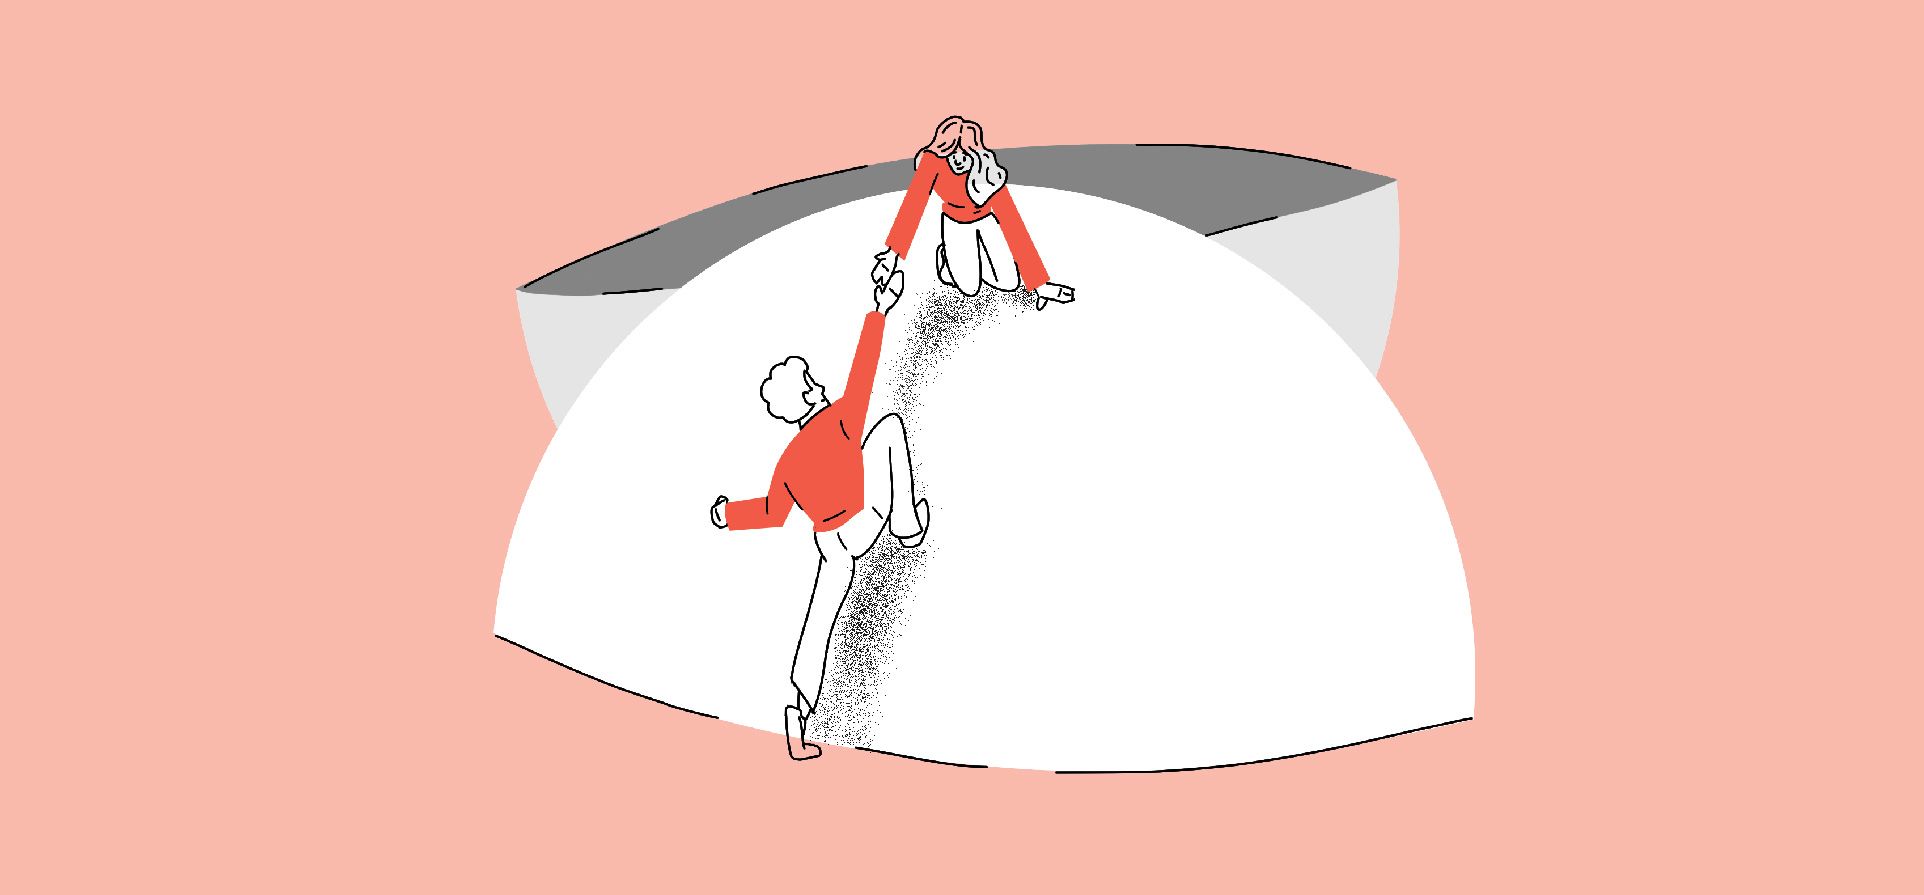 Illustration: One person helps another climb half of a ping-pong ball.